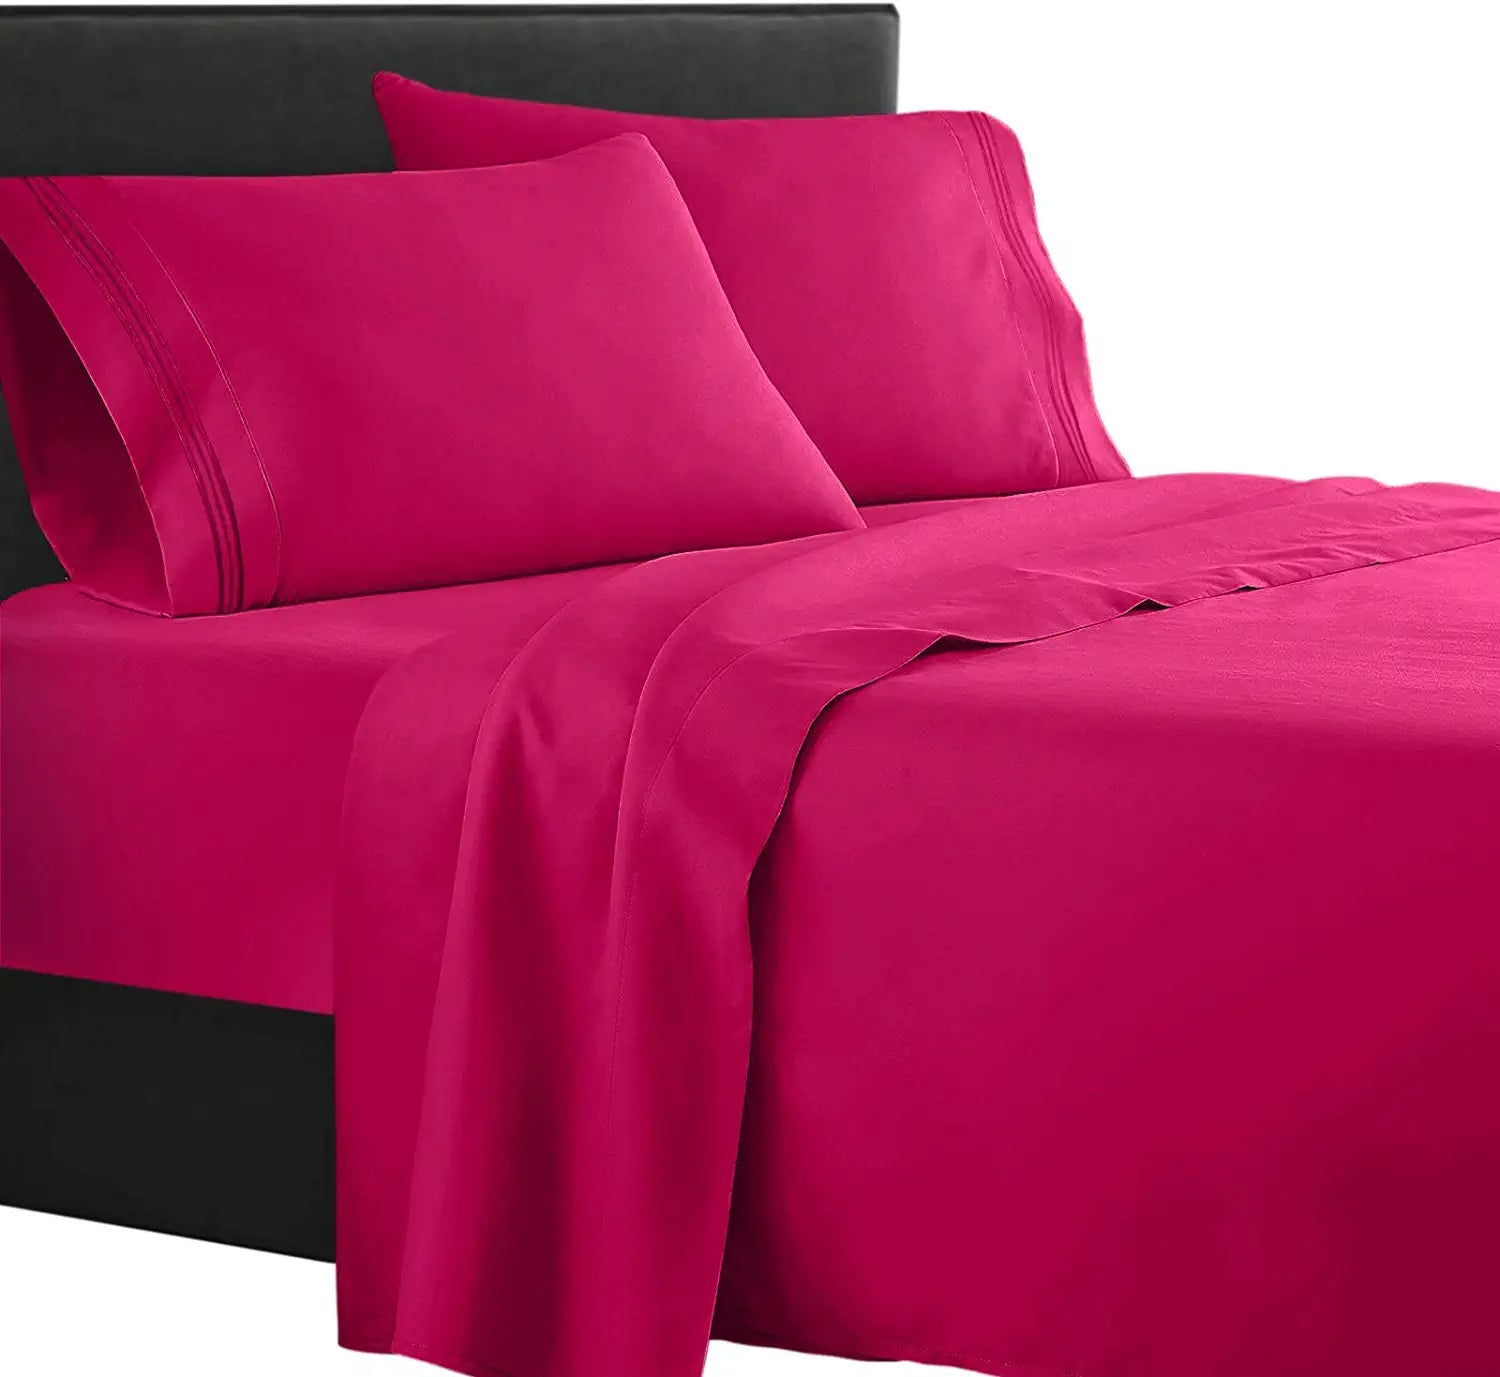 Buy 1200 Thread Count Sheet Set Hot Pink Egyptian Cotton at- Egyptianhomelinens.com!